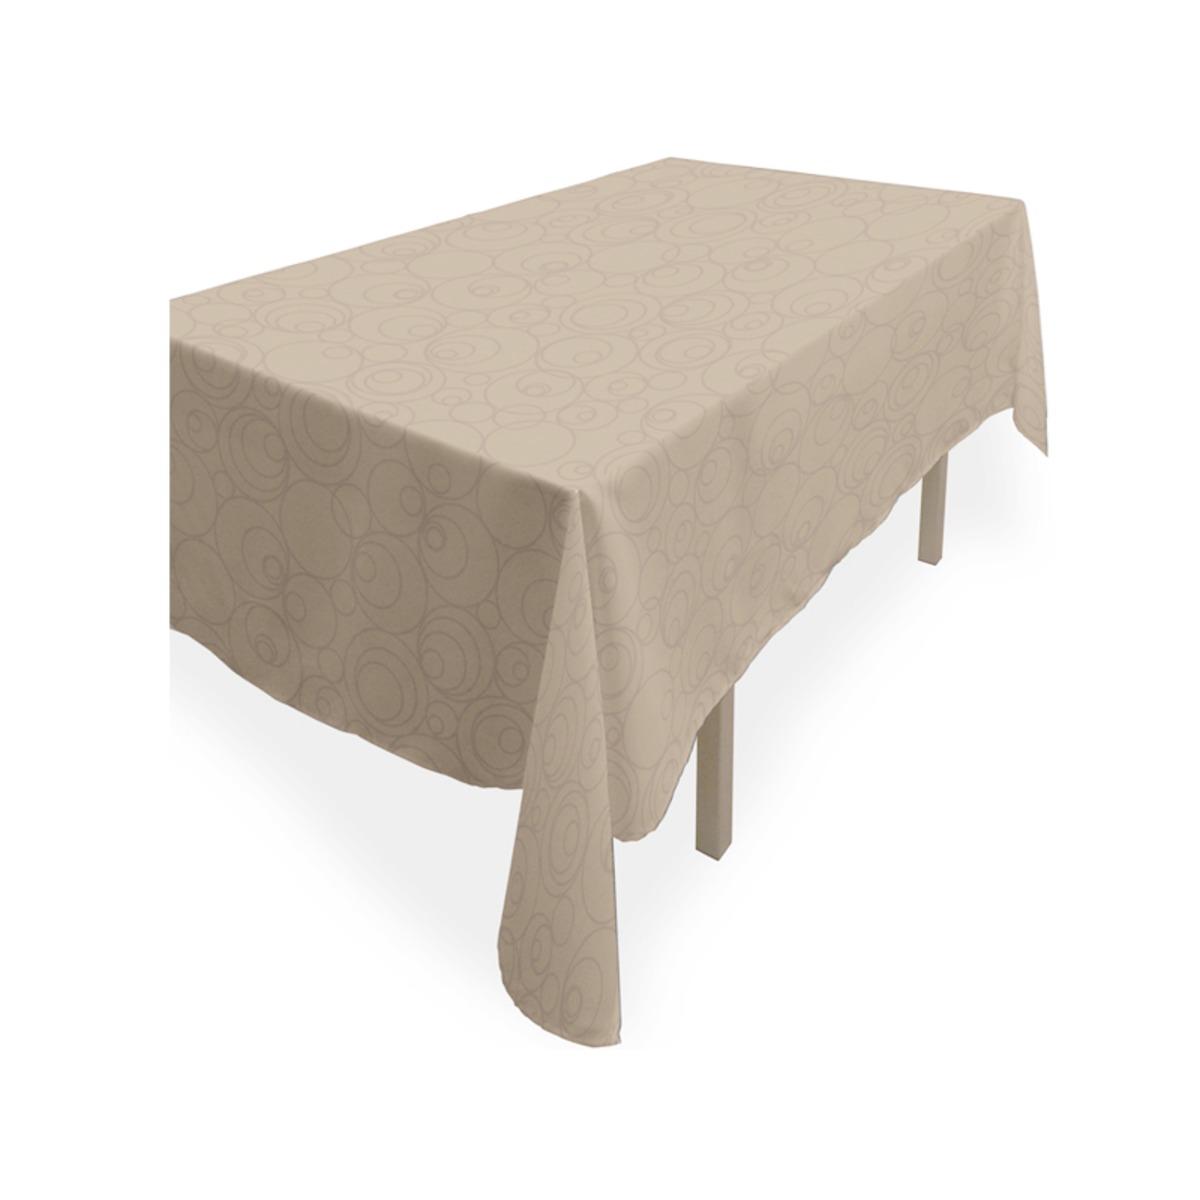 Nappe rectangulaire collection Espace - 140 x 240 cm - Taupe